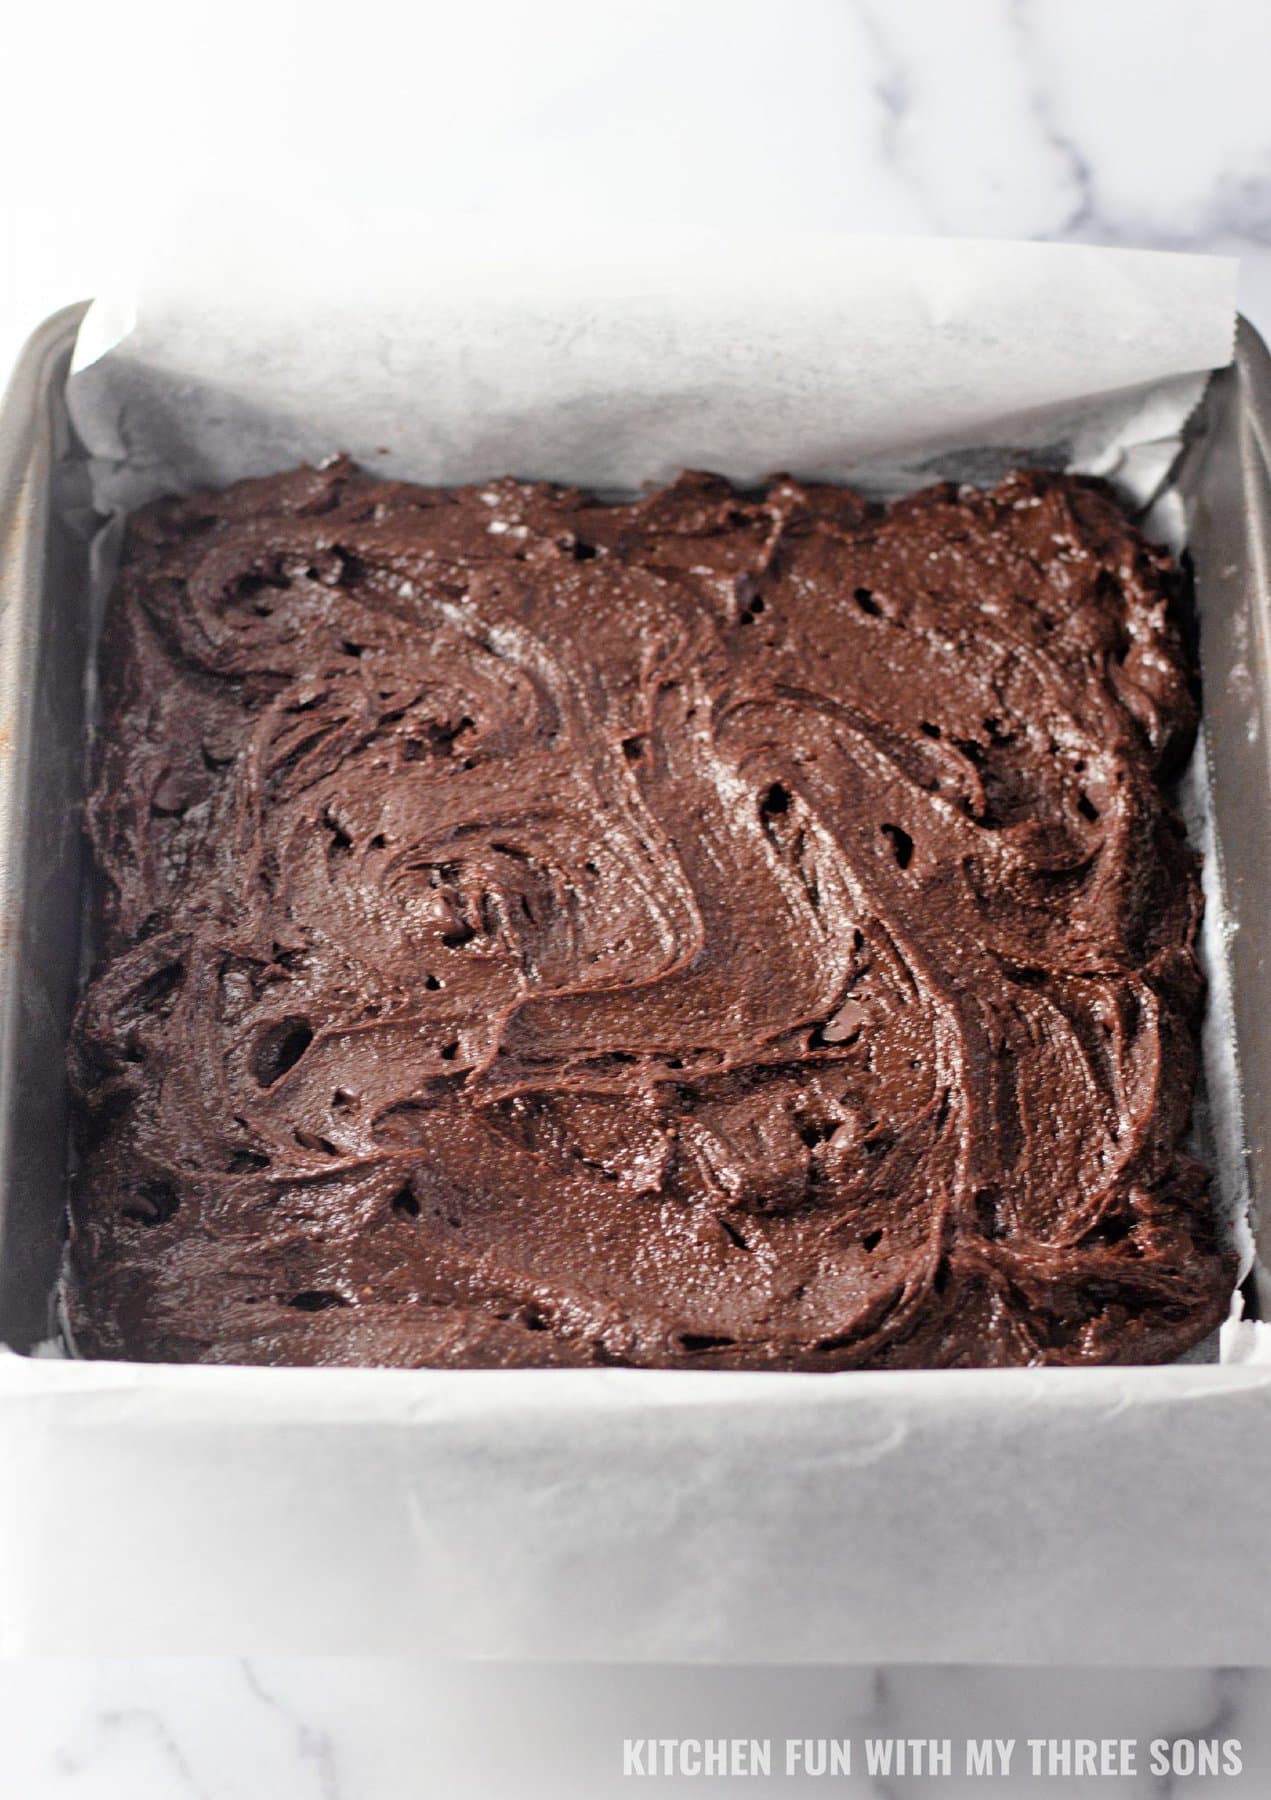 Brownie batter spread into a lined baking pan.